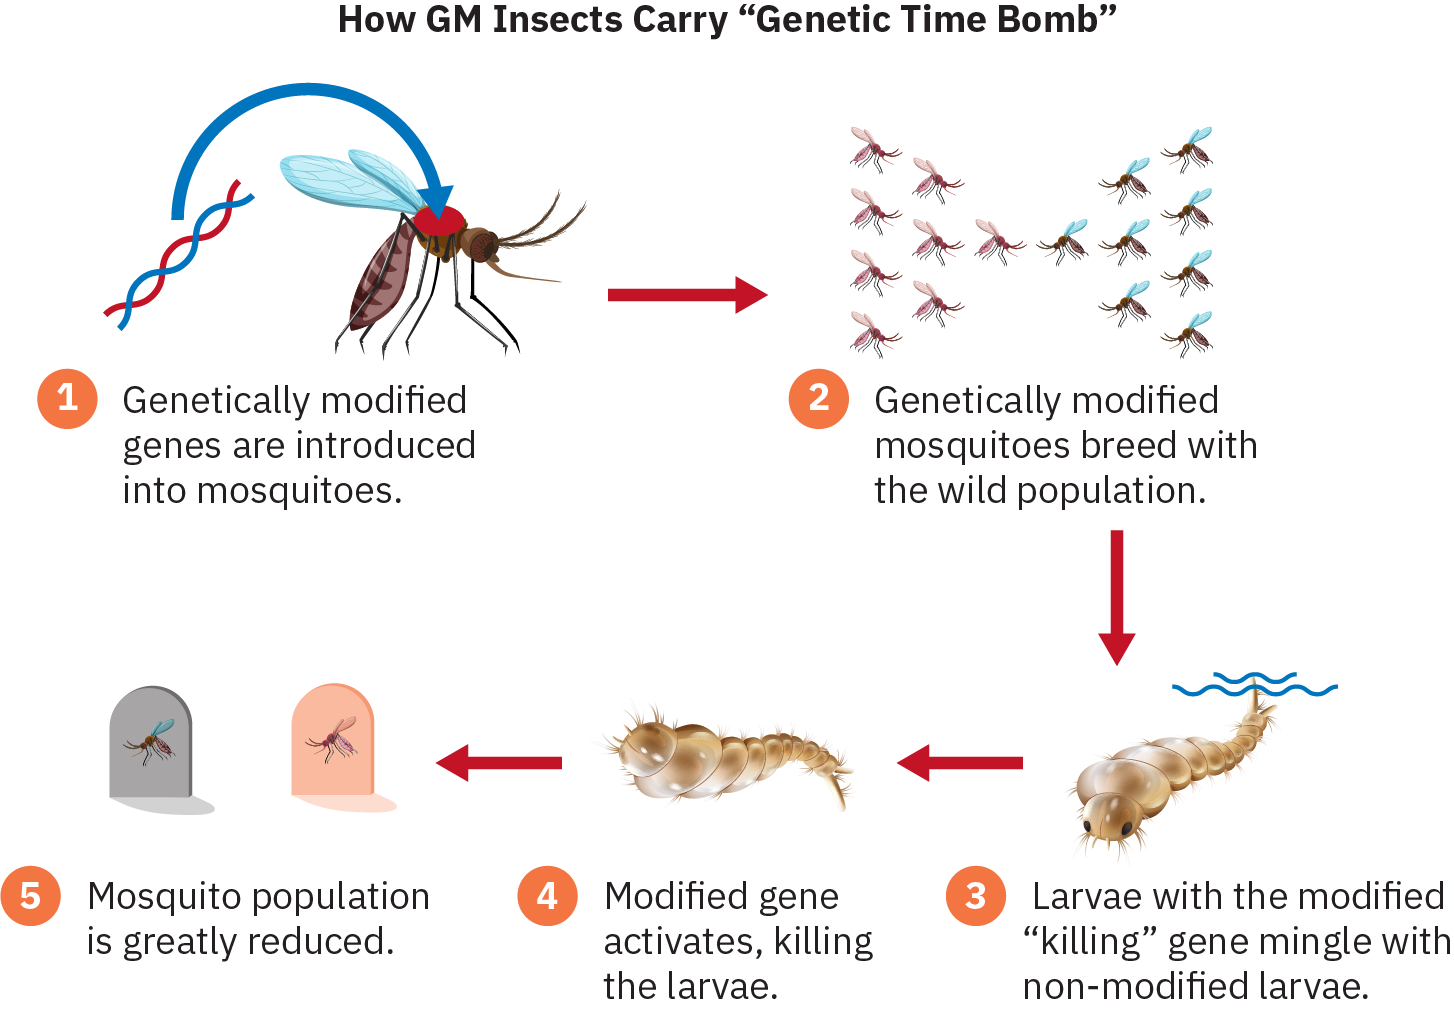 Infographic depicting the following steps: 1) Genetically modified genes are introduced into mosquitoes. 2) Genetically modified mosquitoes breed with wild population. 3) Larvae with the modified “killing” gene mingle with non-modified larvae. 4) Modified gene activates, killing the larvae. 5) Mosquito population is greatly reduced.